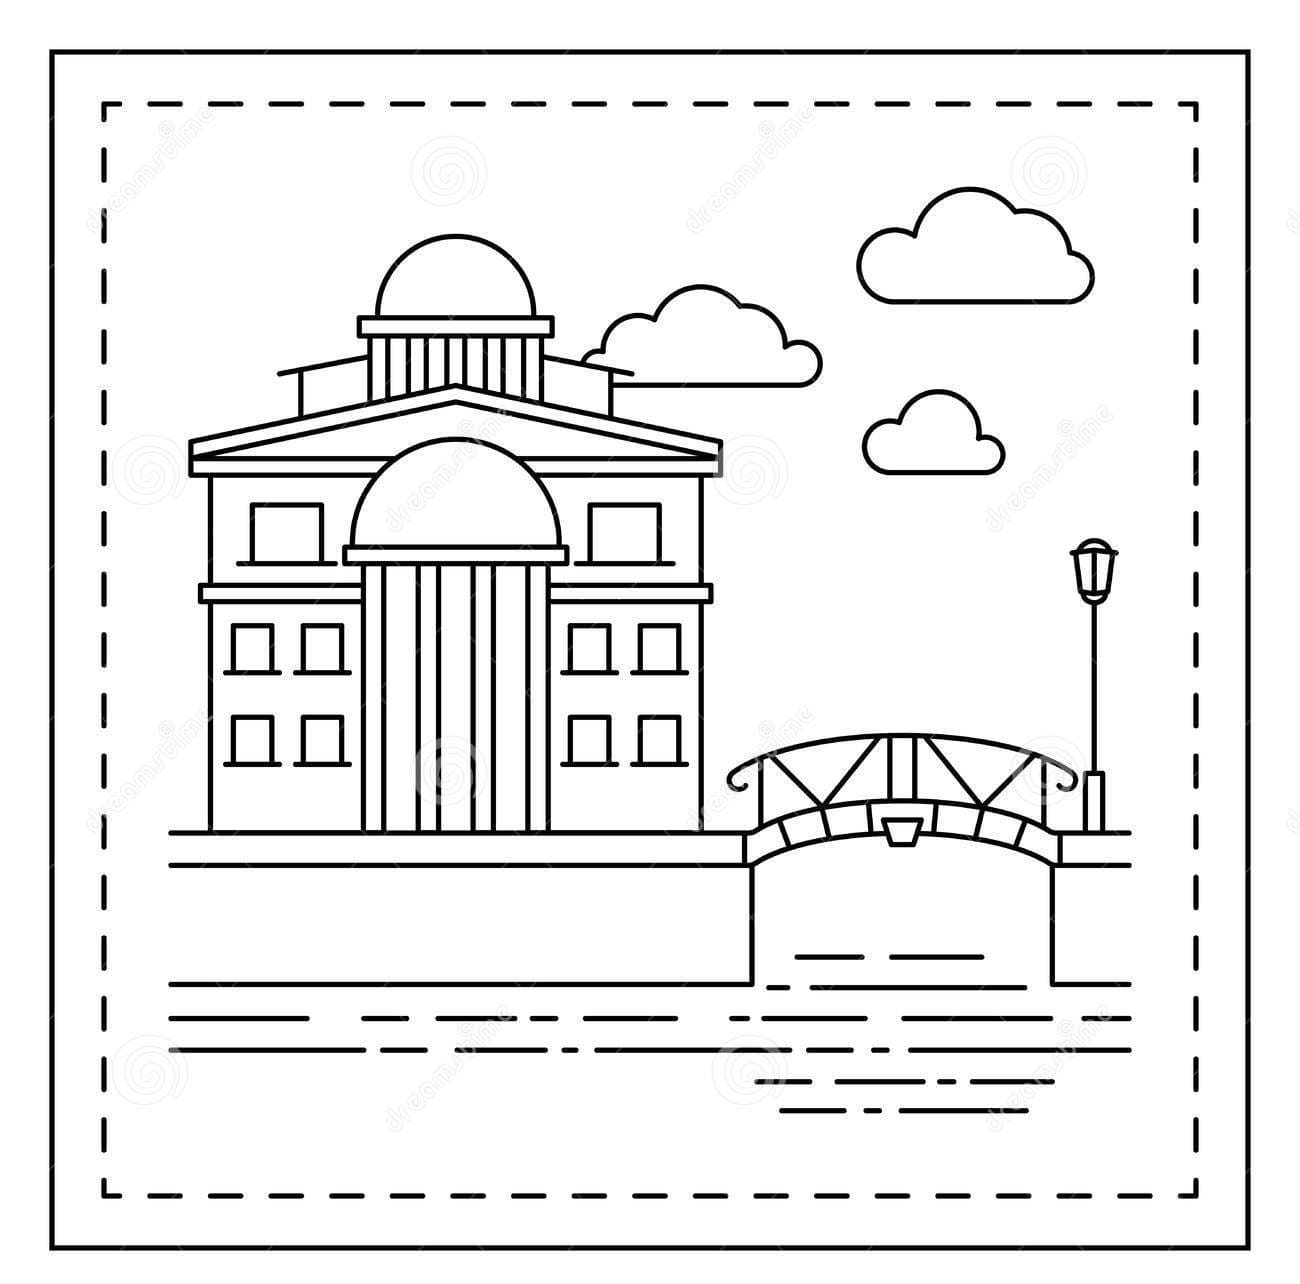 Coloring Page With House And Bridge